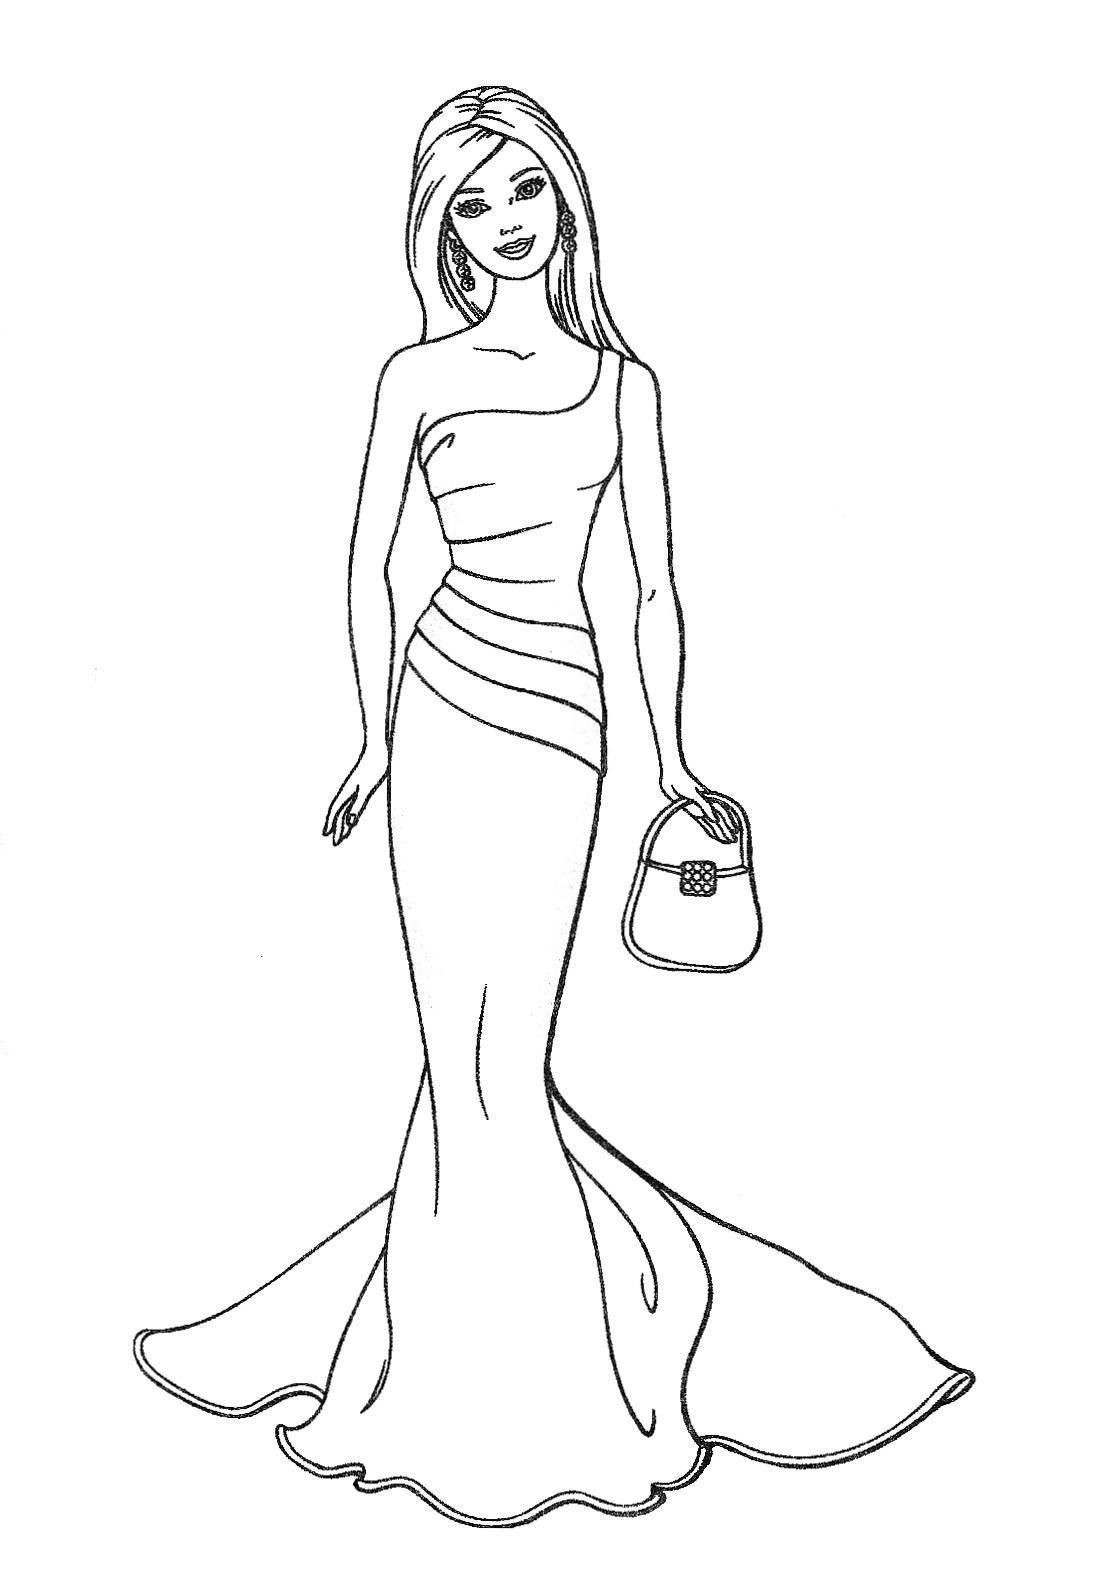 Coloring pages free.